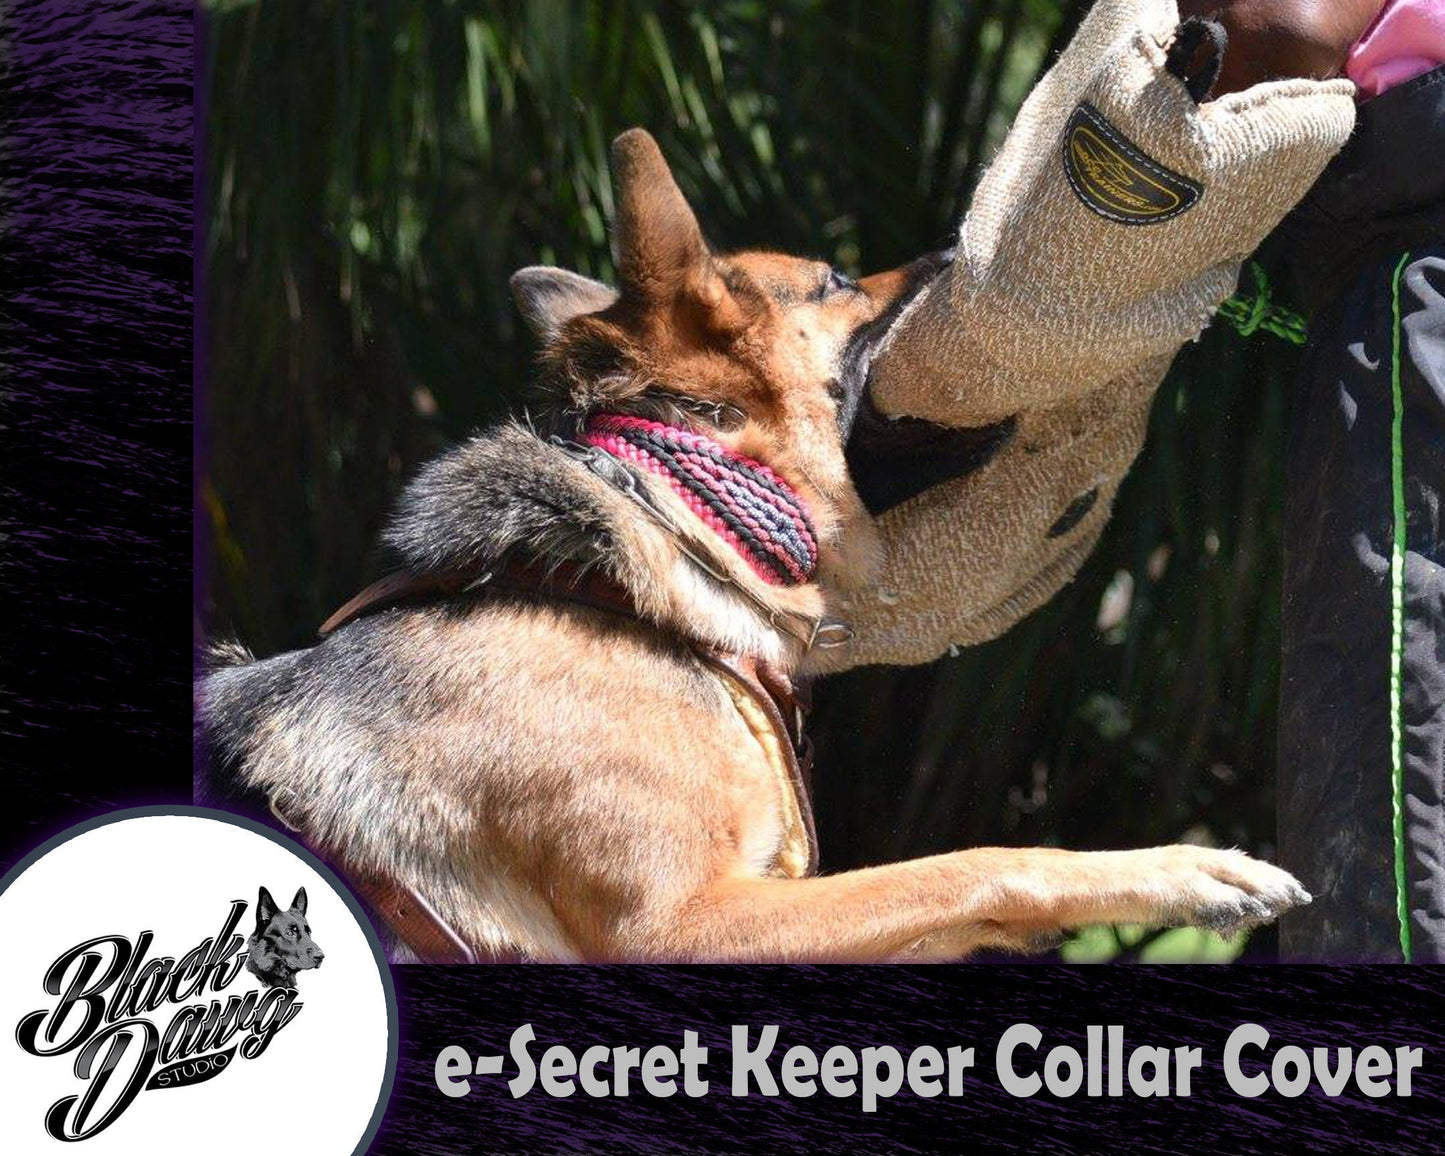 e-Secret Keeper Paracord Collar - Electric/Remote Training Collar Cover - Royal, Uncle ' Sam, Red, Uncle Sam, and White